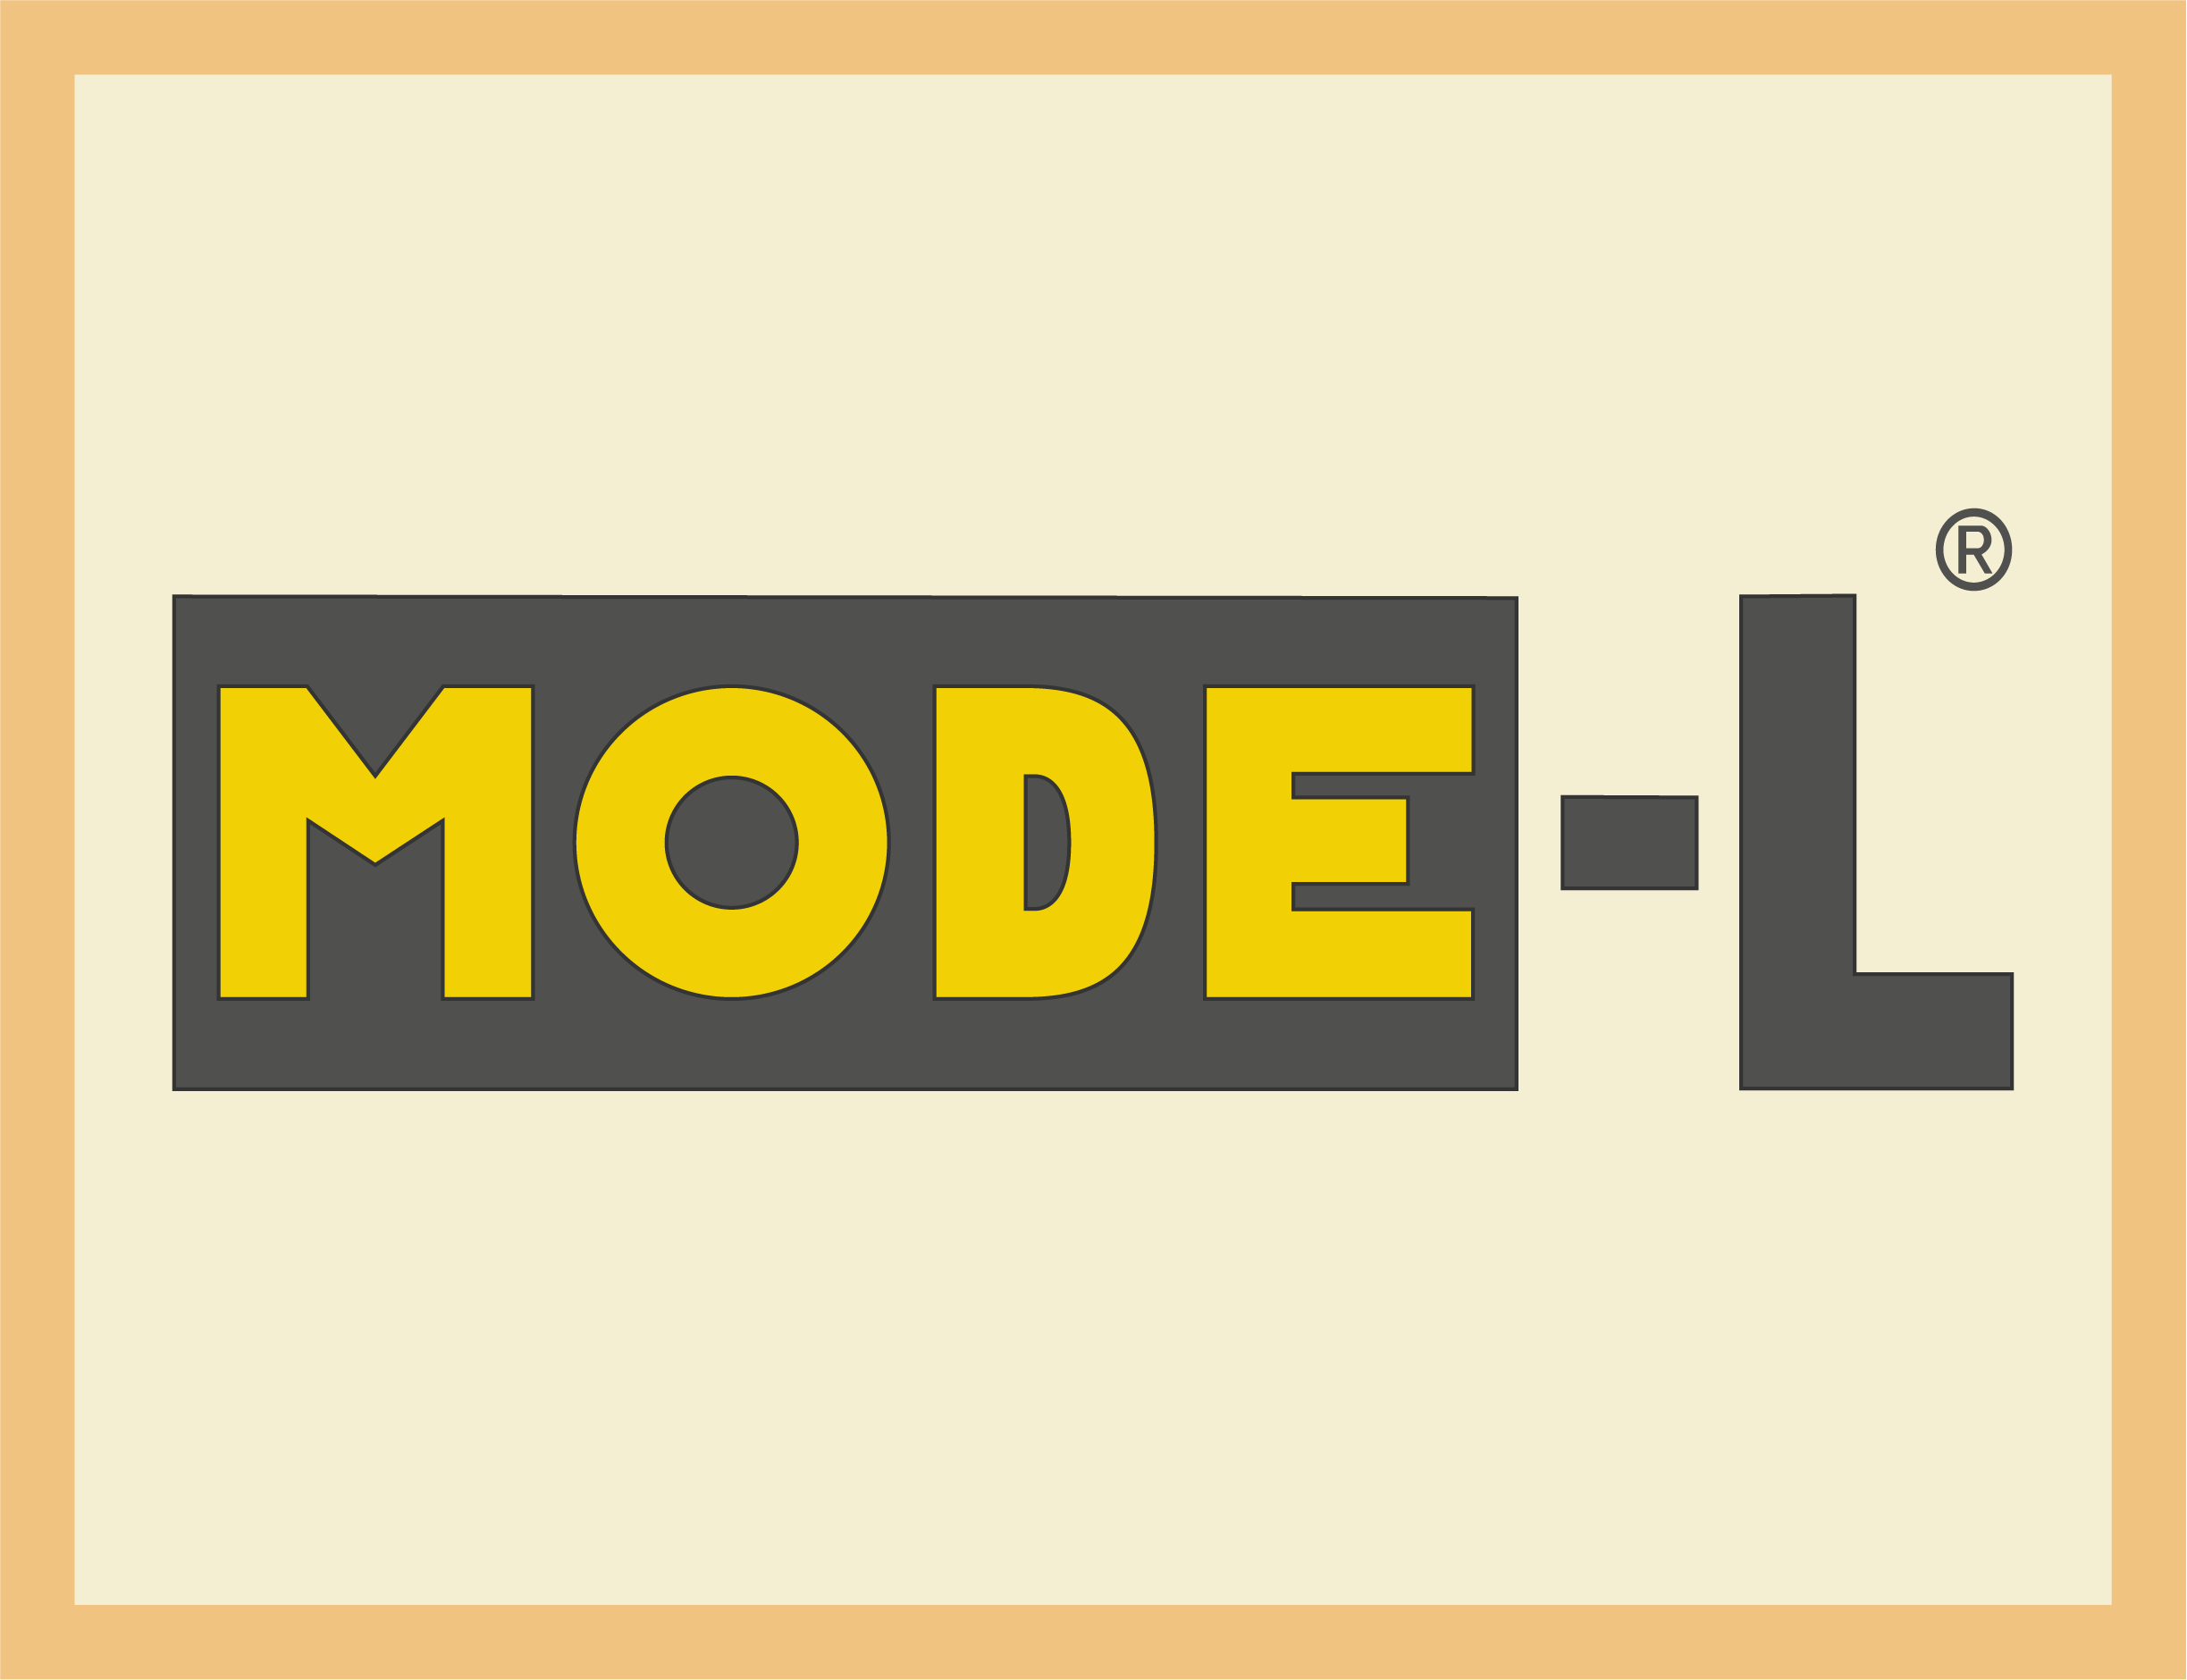 Logo of MODE-L - the research product that is the 'student learner profiler'